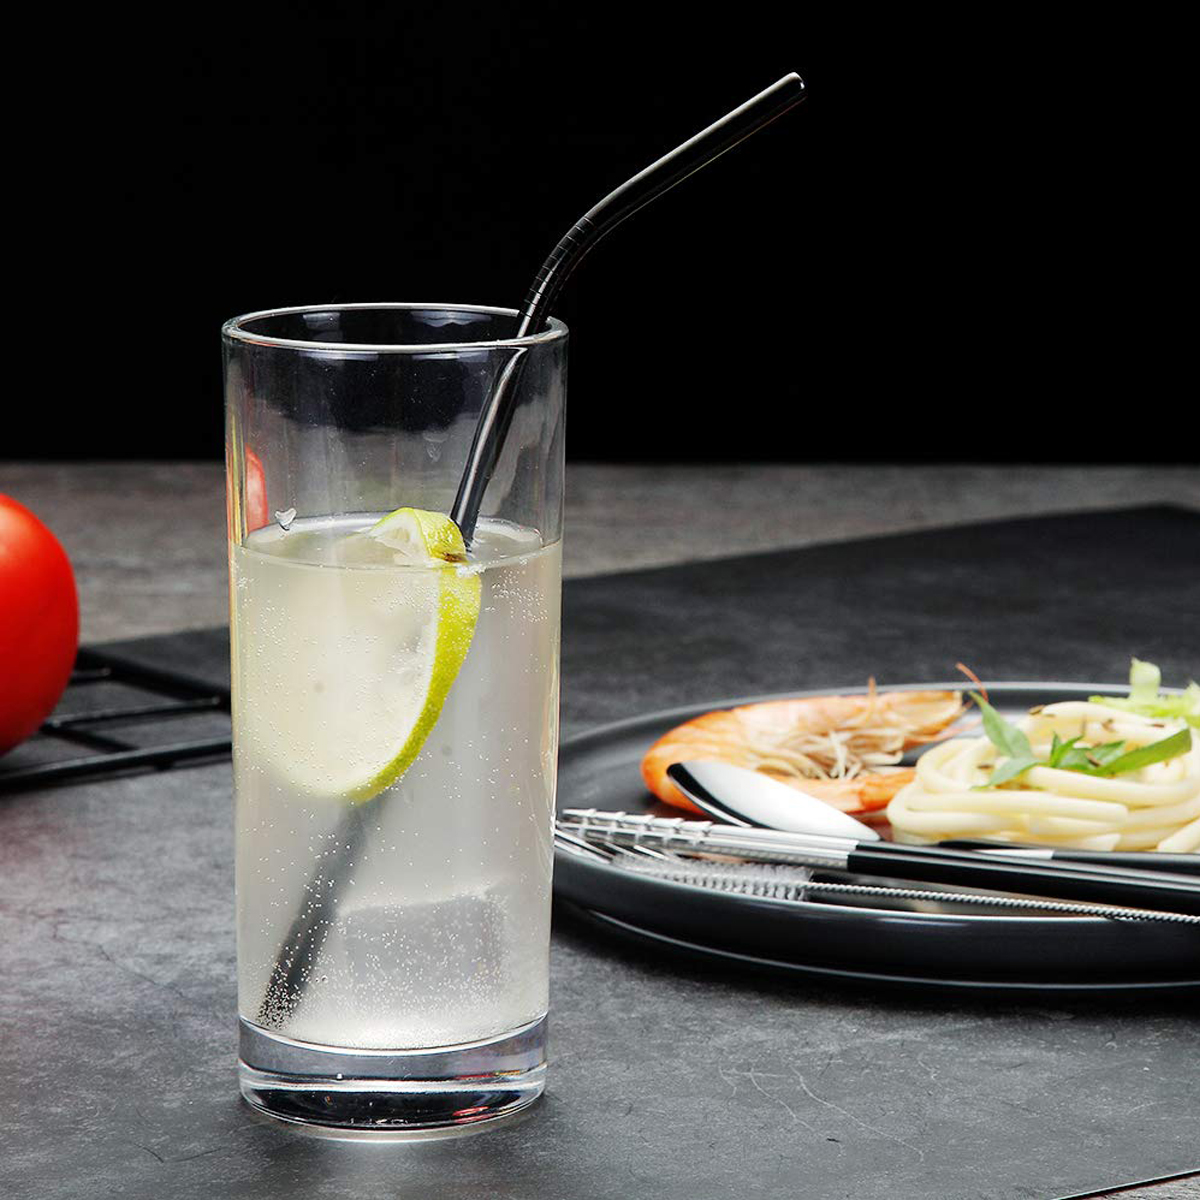 Portable-304-Stainless-Steel-Drinking-Straw-Spoon-Reusable-Straws-Fork-Chopsticks-Brush-Combination--1529584-8